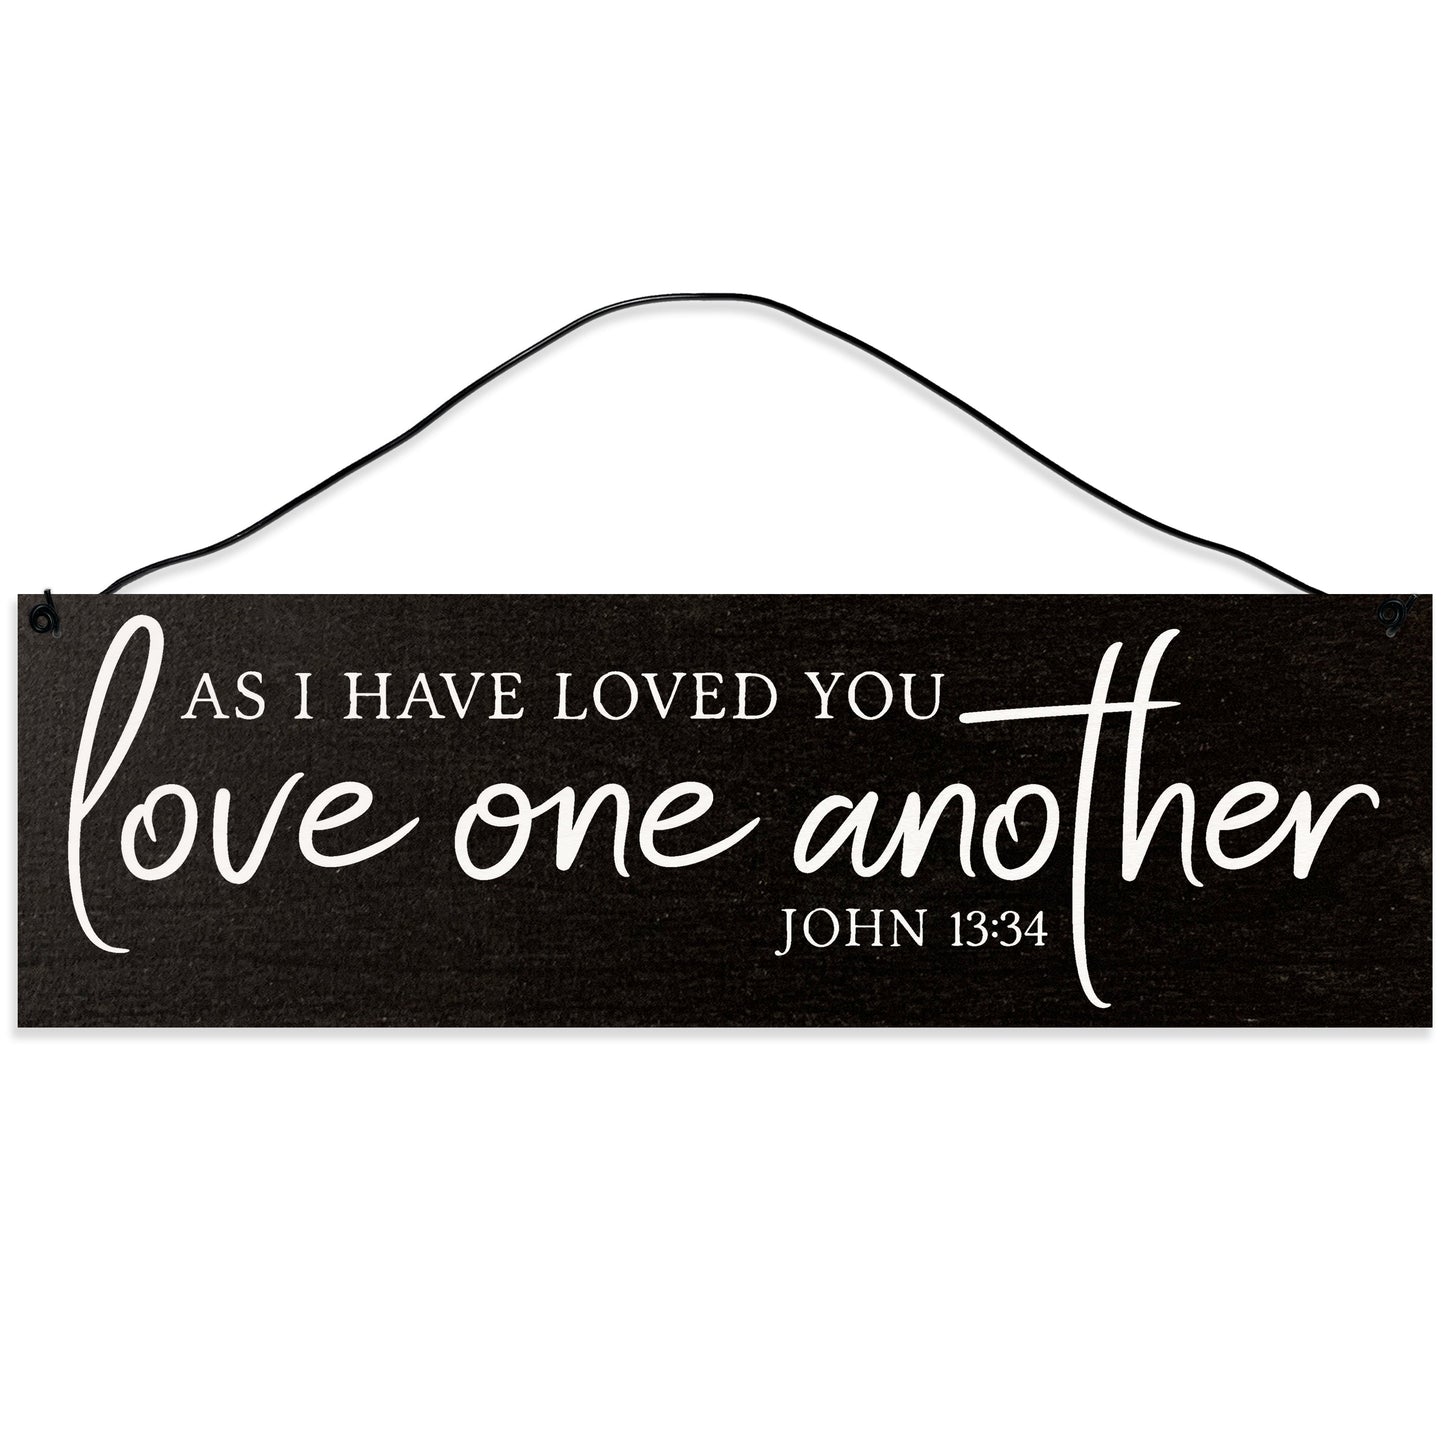 Sawyer's Mill - As I Have Loved You, Love One Another. John 13:34 Wood Sign for Home or Office. Measures 3x10 inches.